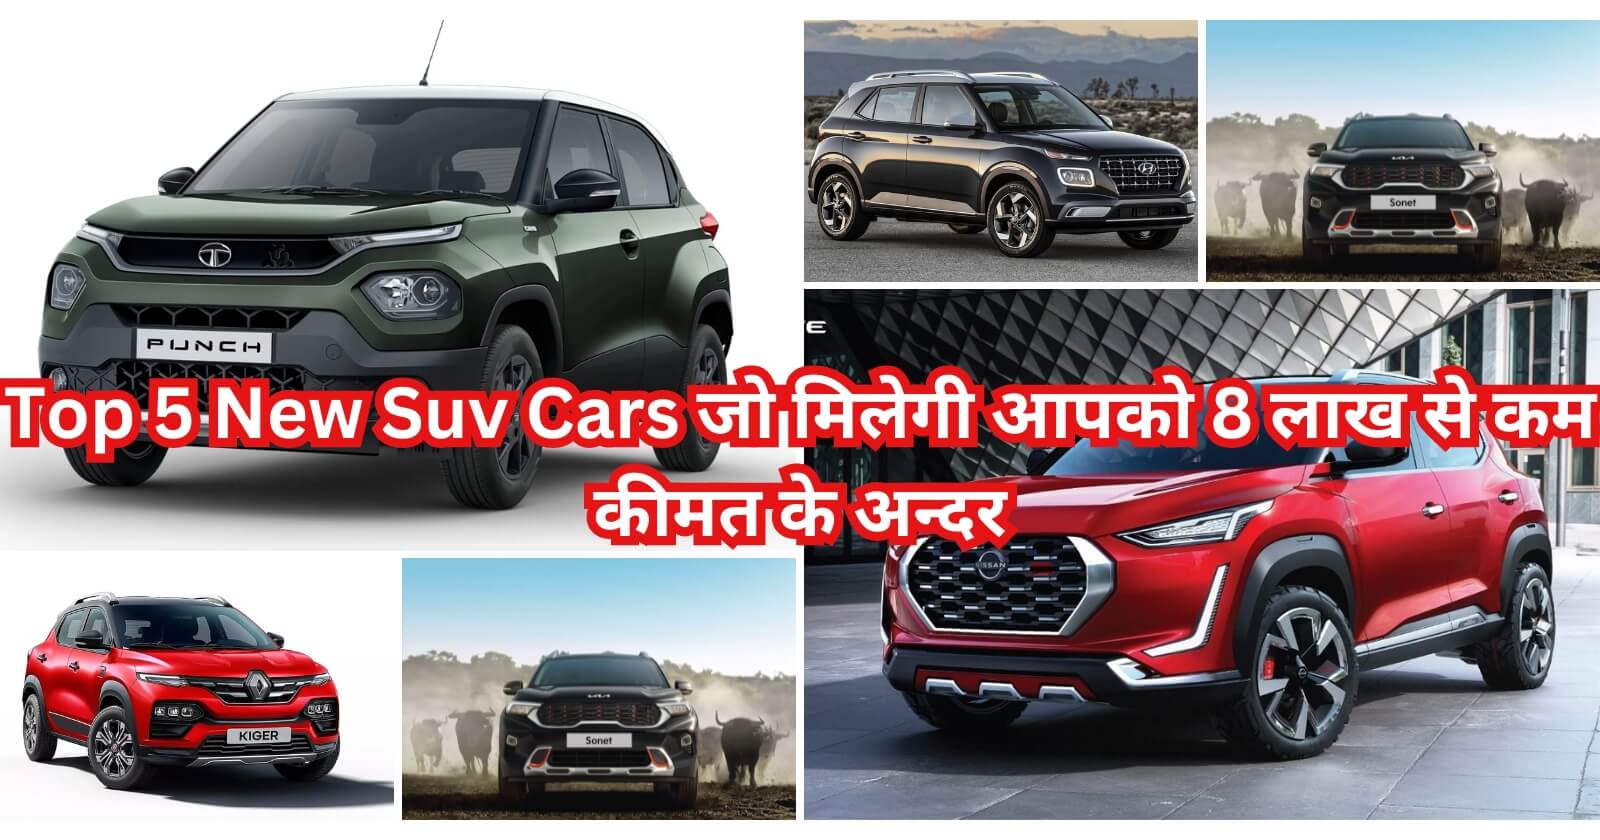 Top 5 New Suv Cars